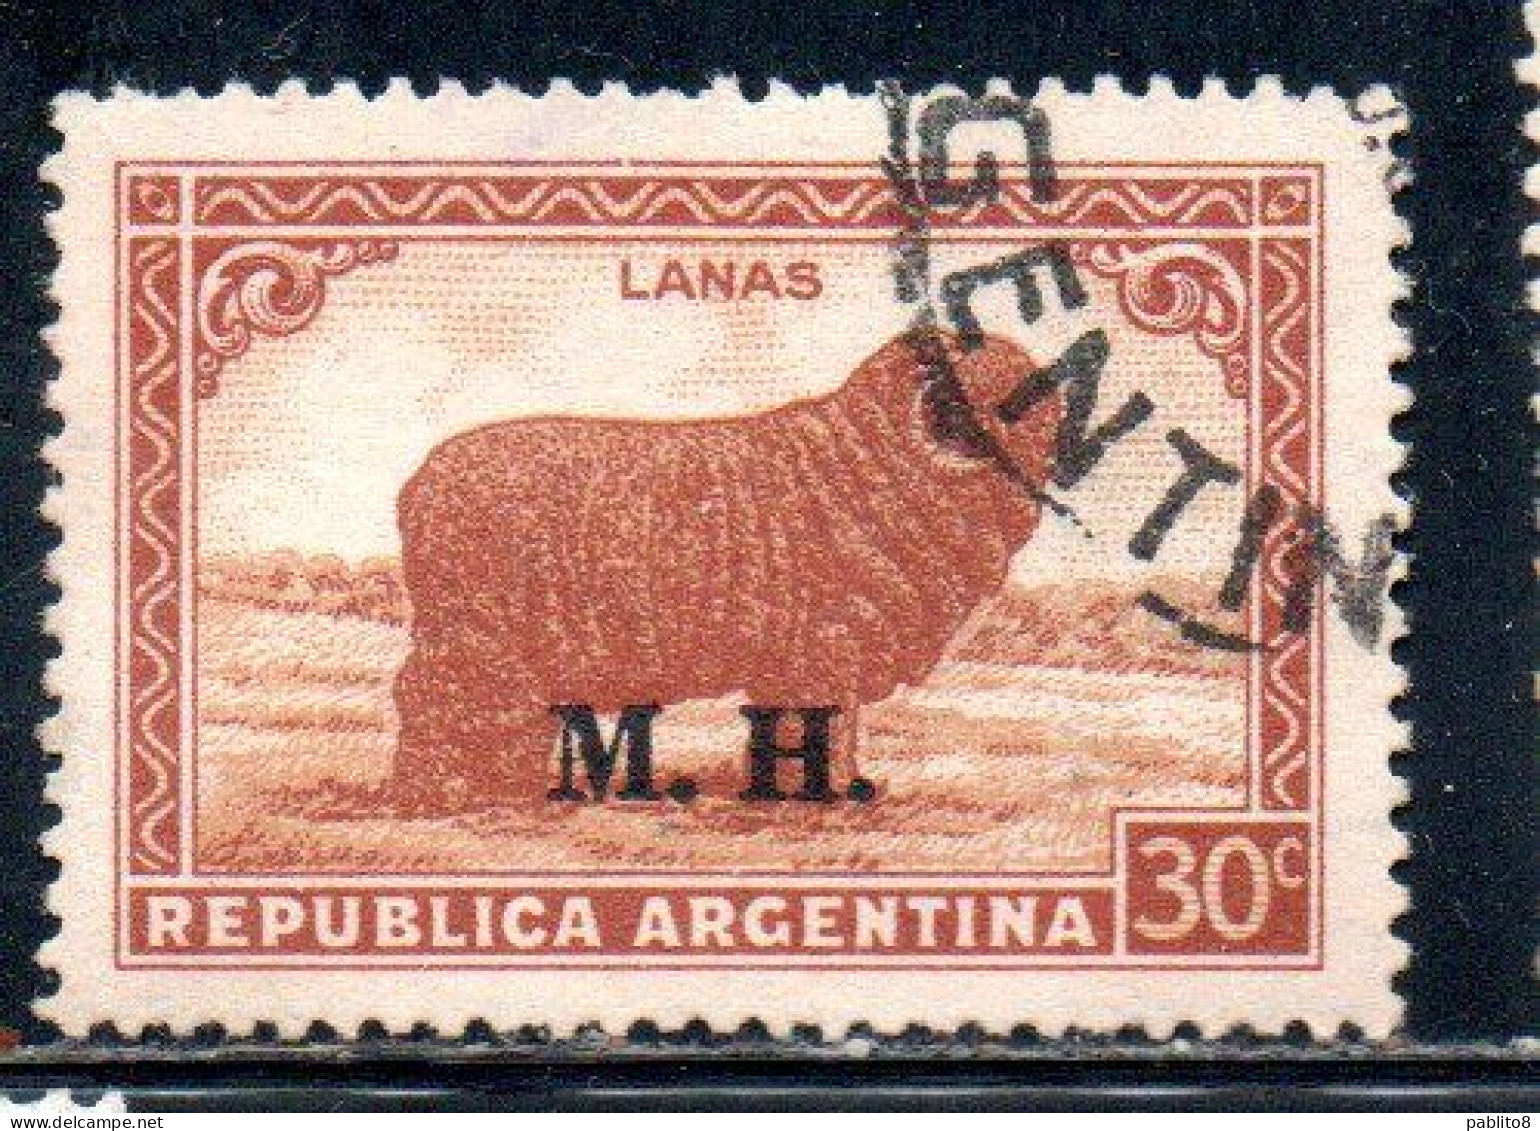 ARGENTINA 1935 1937 OFFICIAL DEPARTMENT STAMP OVERPRINTED M.H. MINISTRY OF FINANCE MH 30c USED USADO - Oficiales